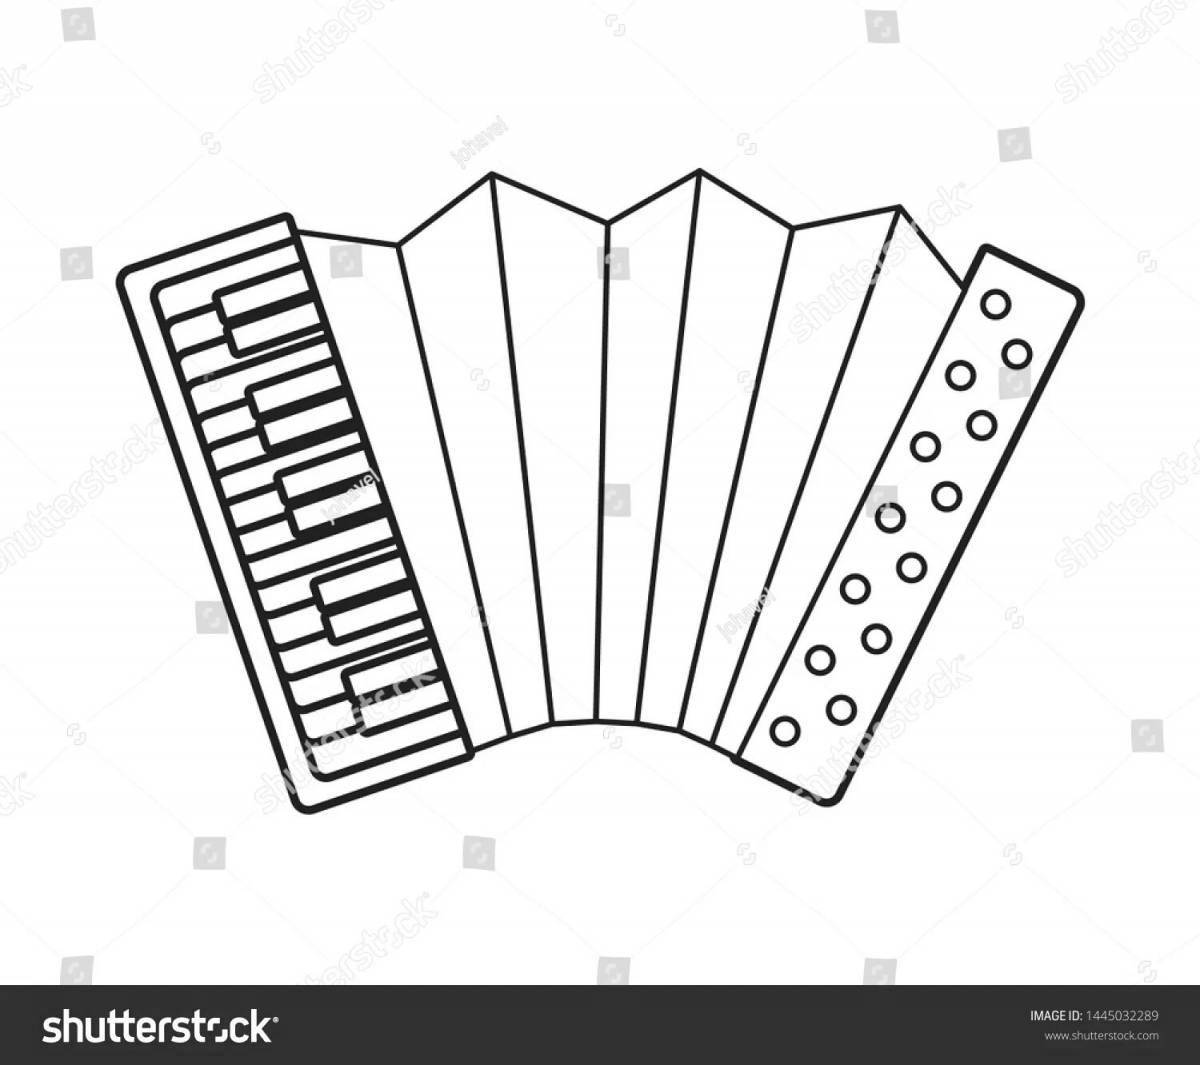 Amazing accordion musical instruments for kids with names